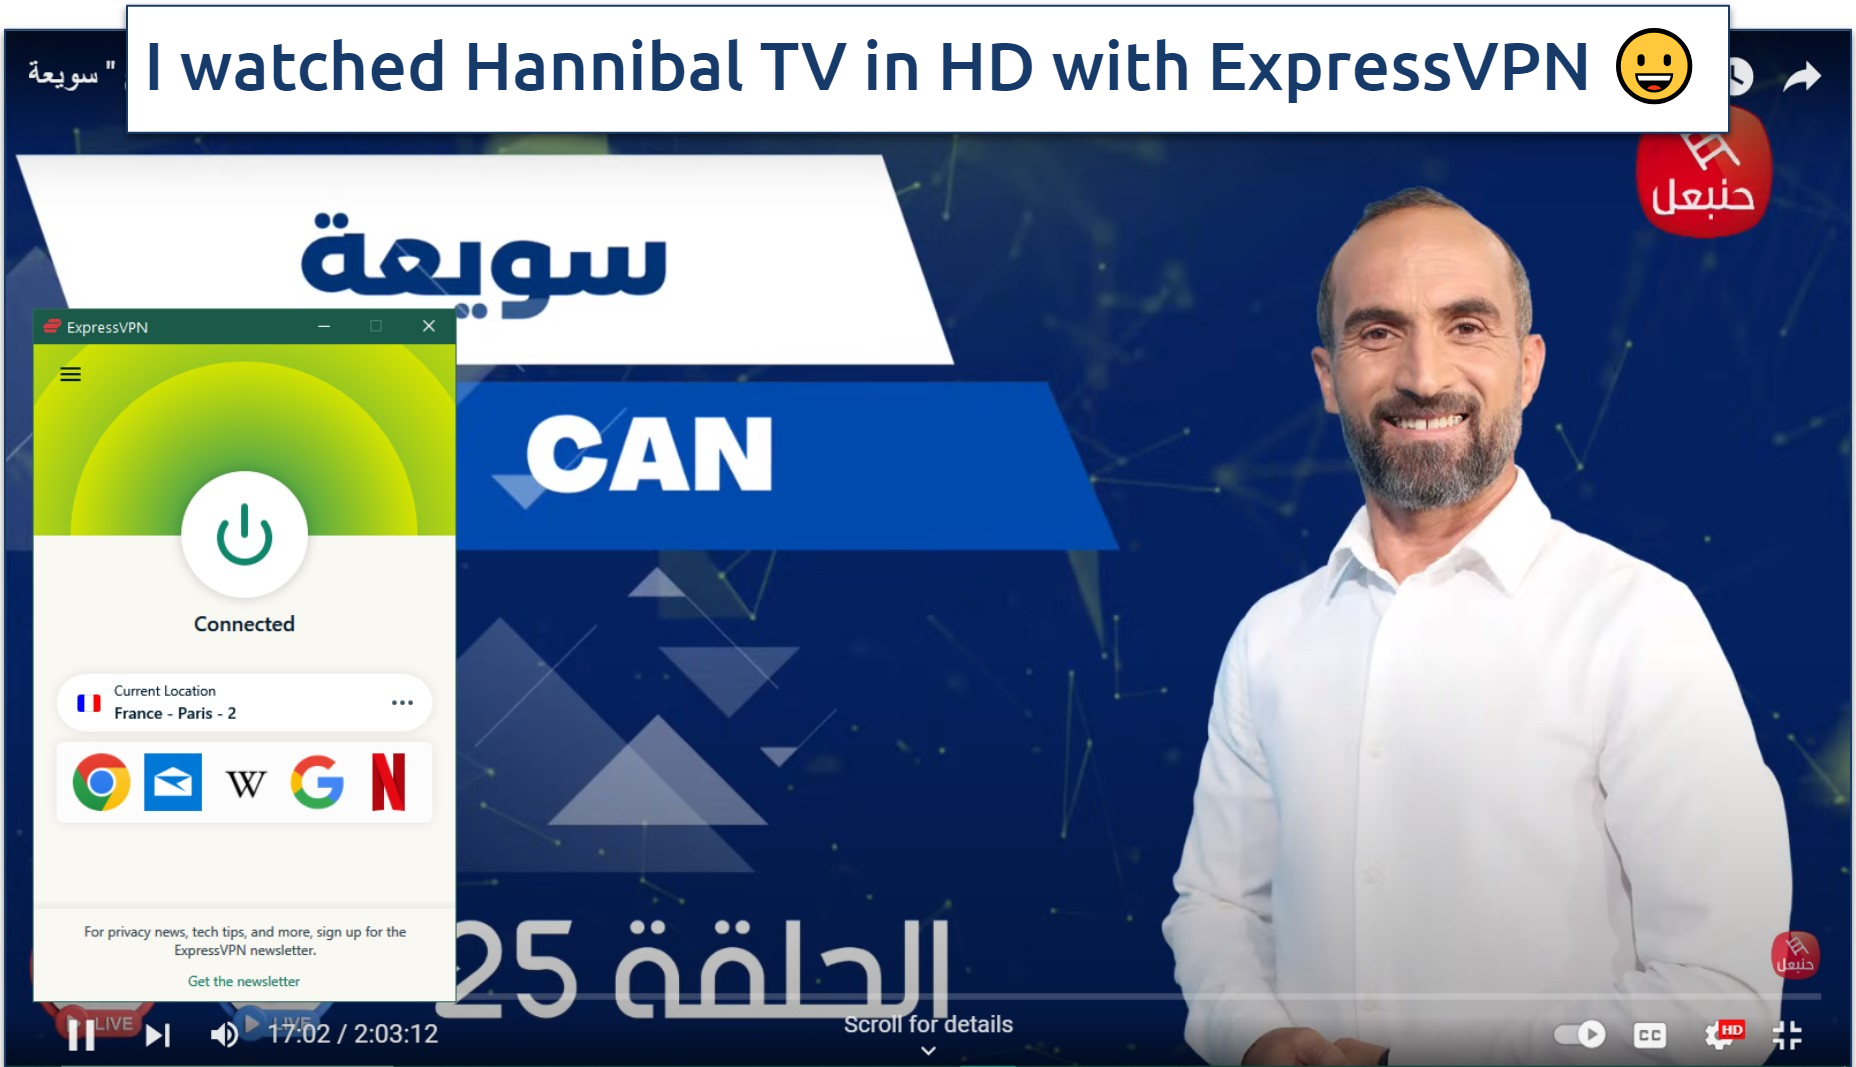 Watching Hannibal TV on YouTube with ExpressVPN connected to Paris, France